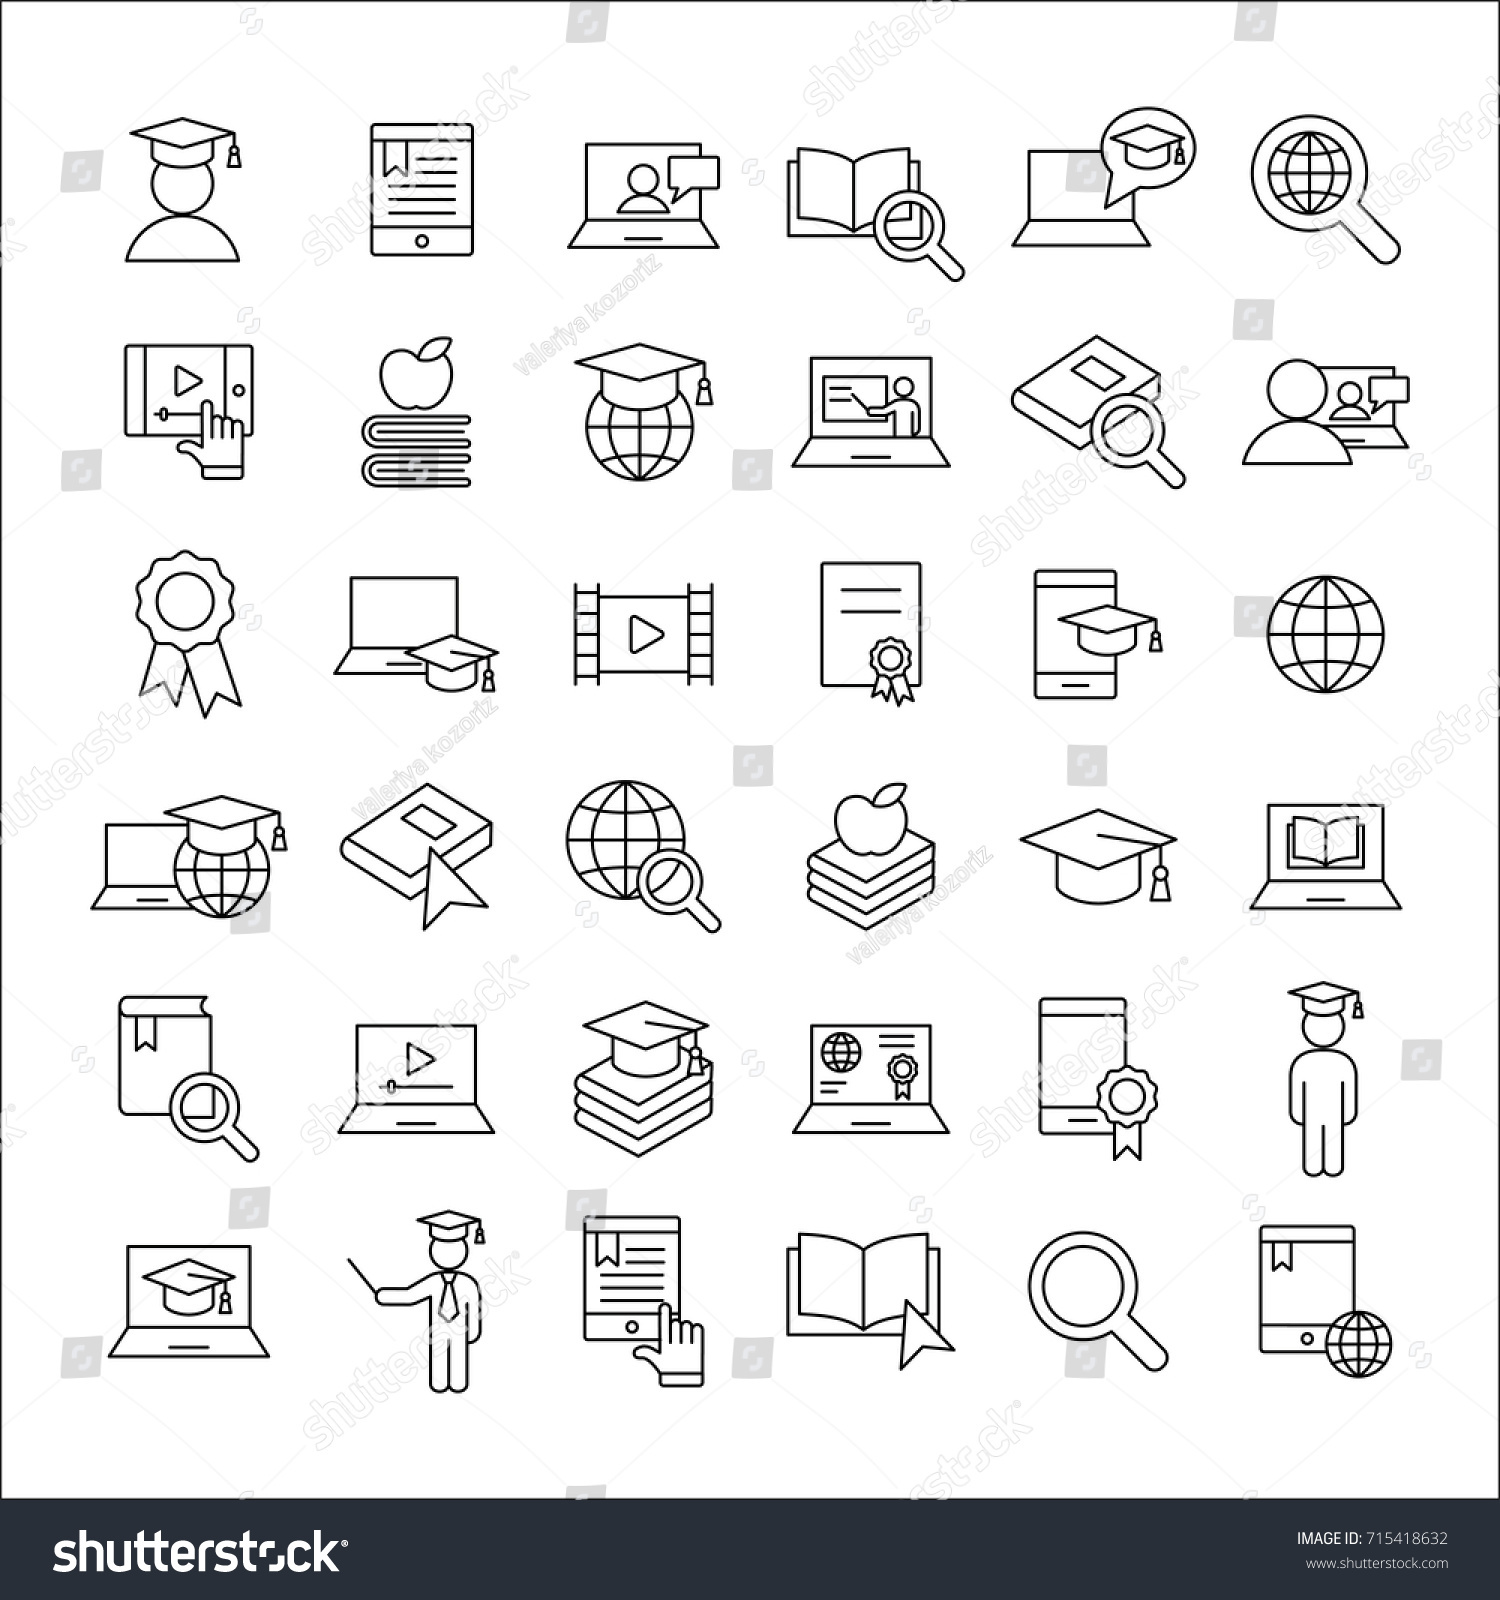 e-learning and online study thin line icons black set on white background #715418632